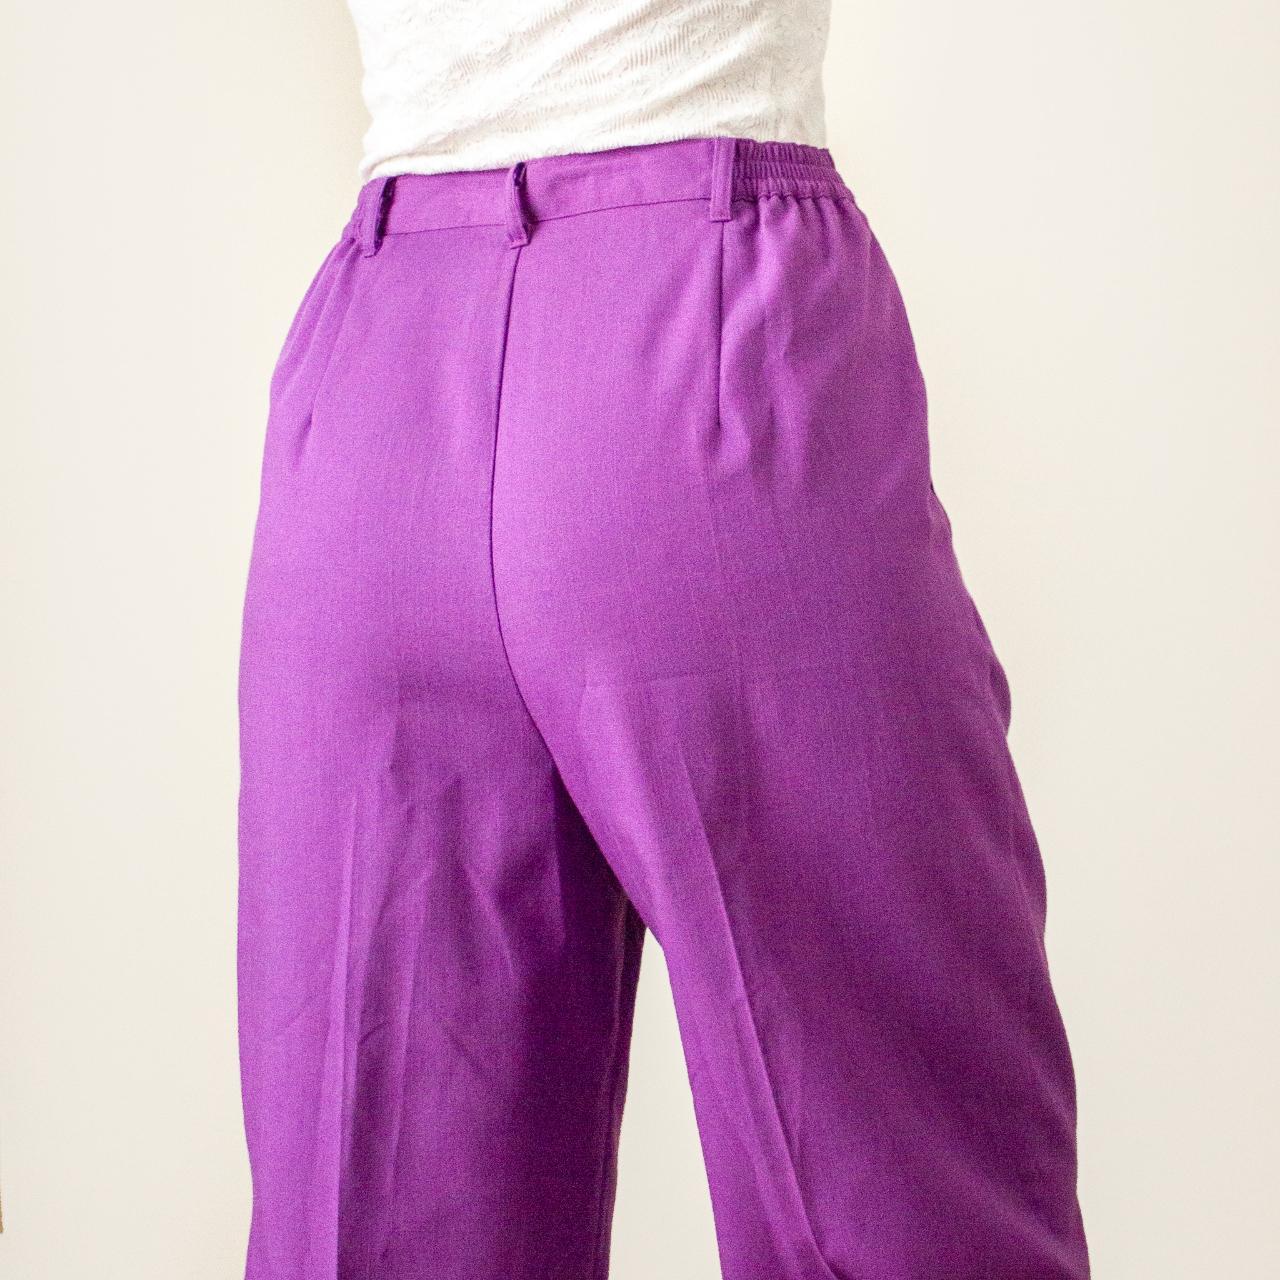 Purple pleated high waisted trousers Pants are not... - Depop